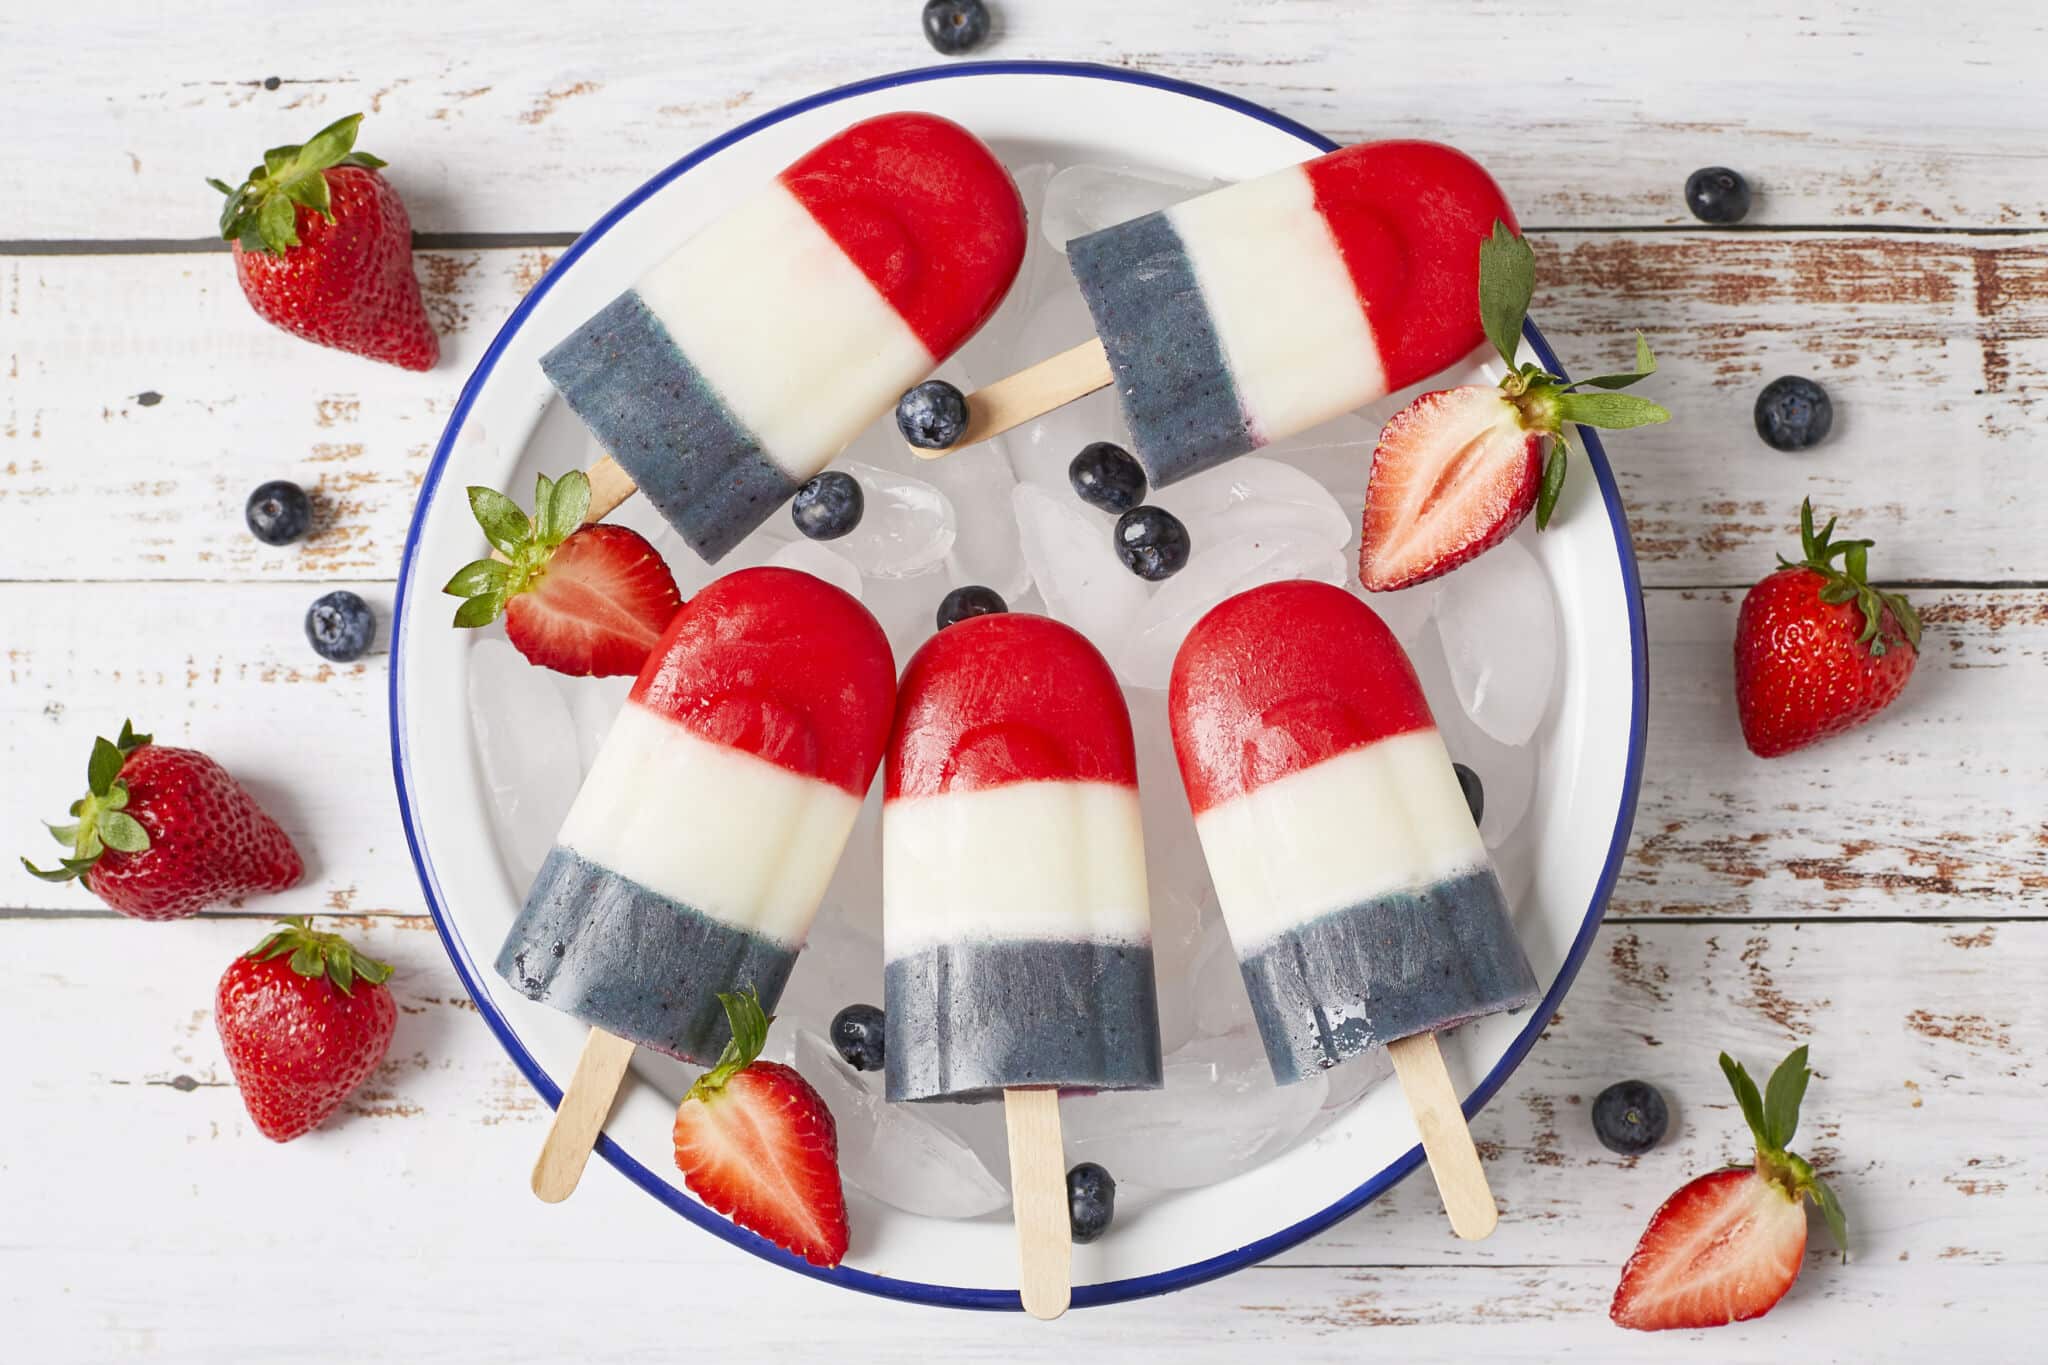 How to make popsicles: Ice pop experts weigh in on their favorite